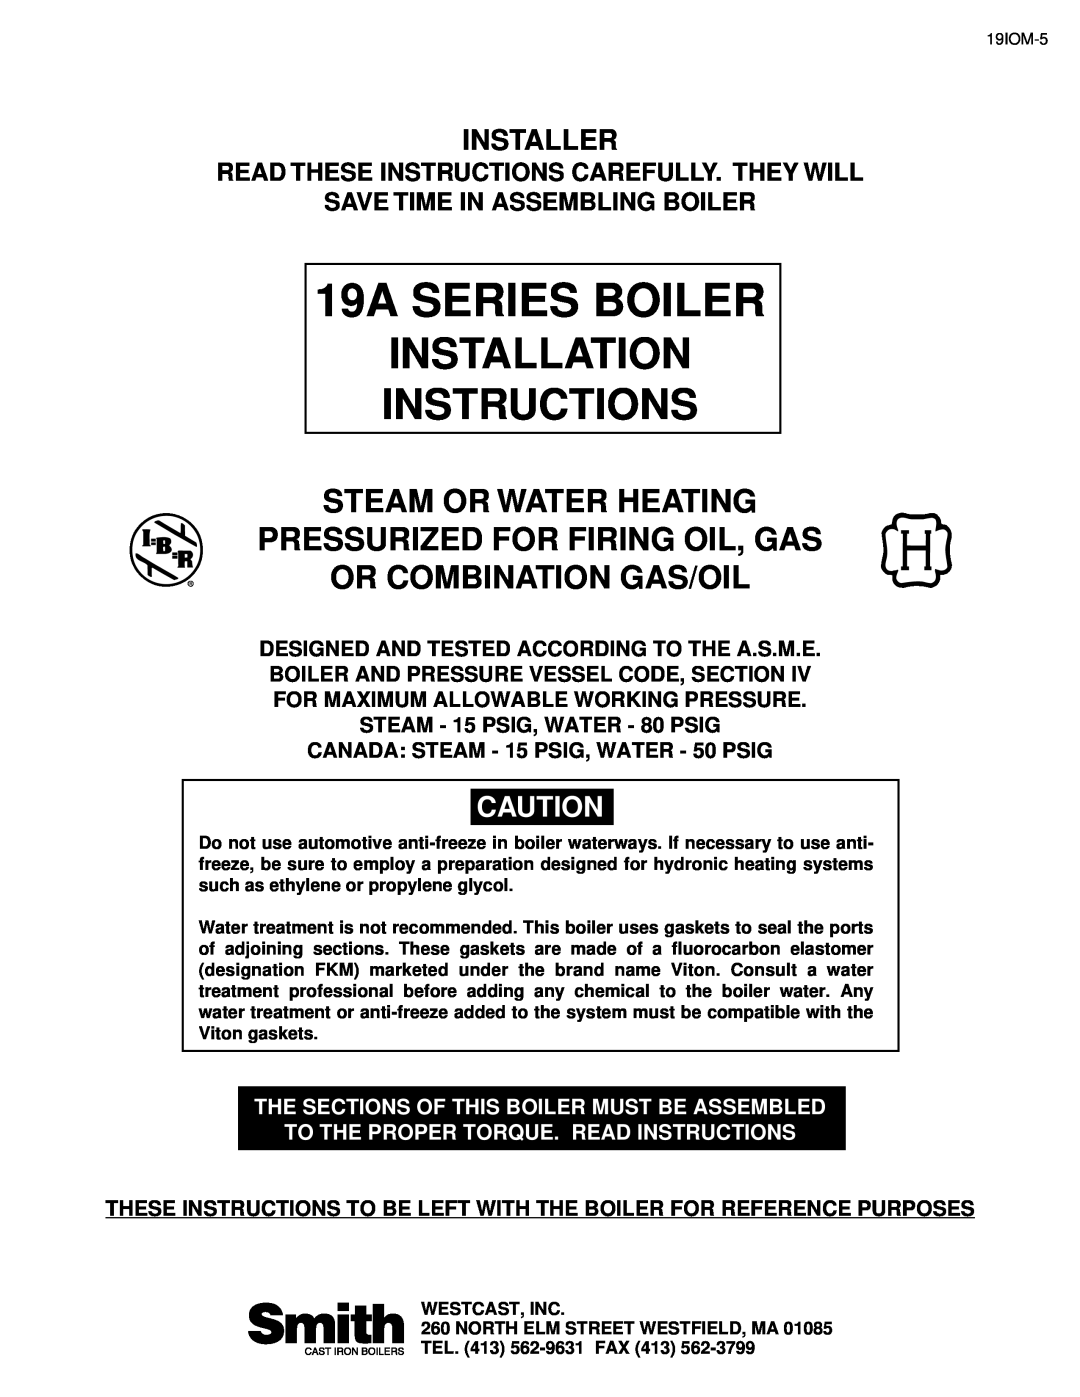 Smith Cast Iron Boilers 19A SERIES installation instructions Read These Instructions Carefully. They Will, Installer 